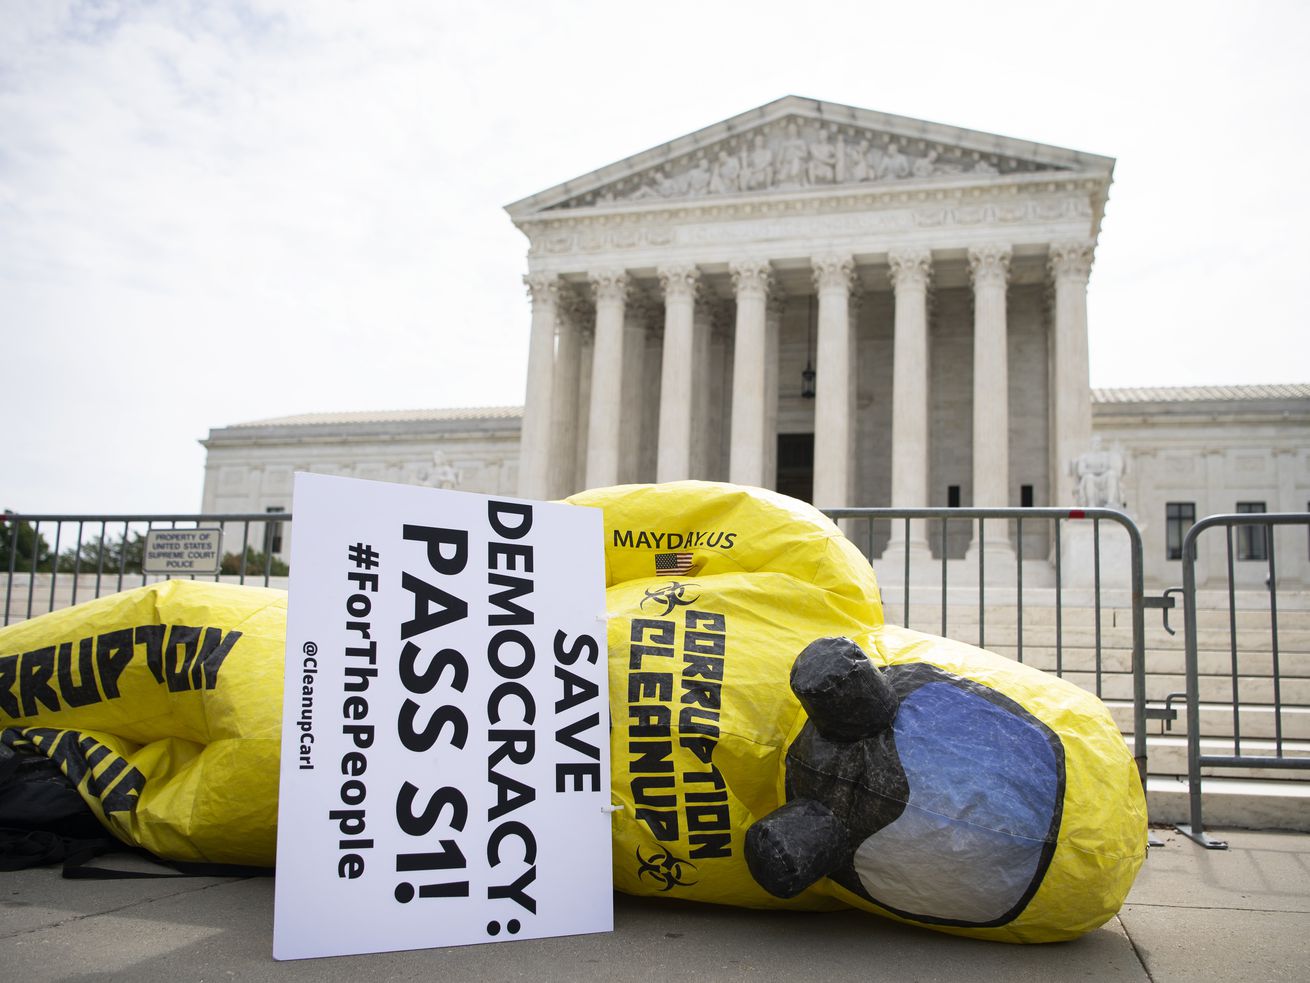 An inflatable figure wearing a yellow hazmat suit and gas mask lies on its side carrying a sign that reads “Save democracy, Pass S 1.” The Supreme Court building is in the background.